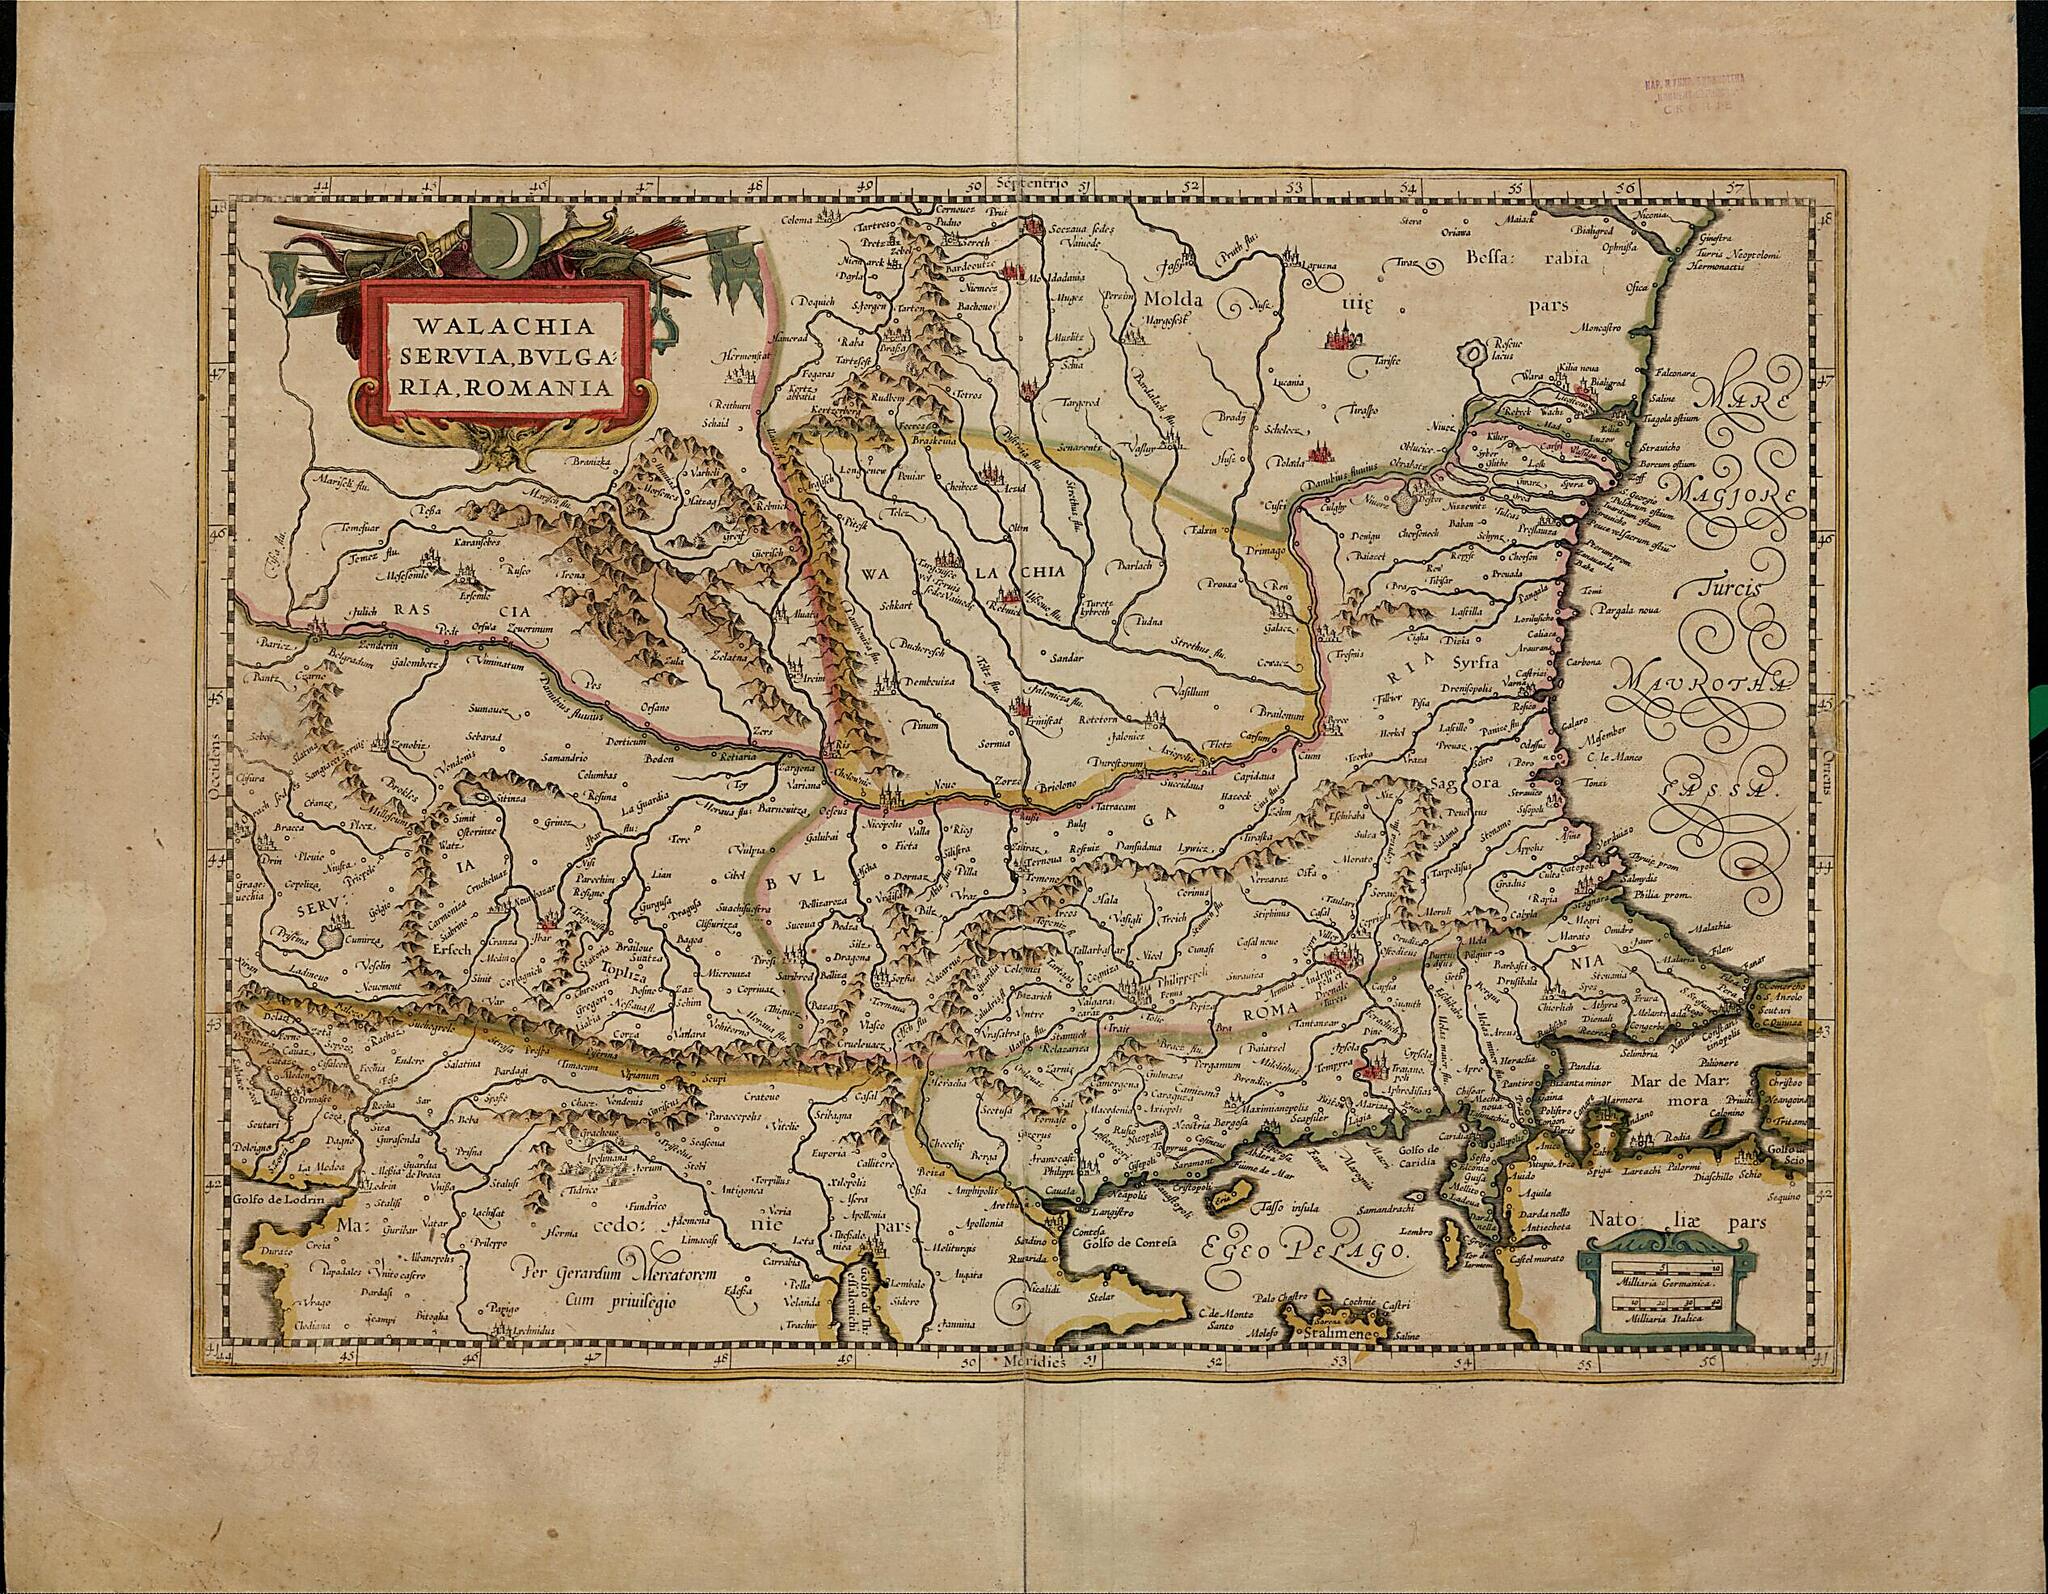 This old map of Wallachia, Serbia, Bulgaria, Romania. (Walachia, Servia, Bulgaria, Romania) from 1589 was created by Gerhard Mercator in 1589